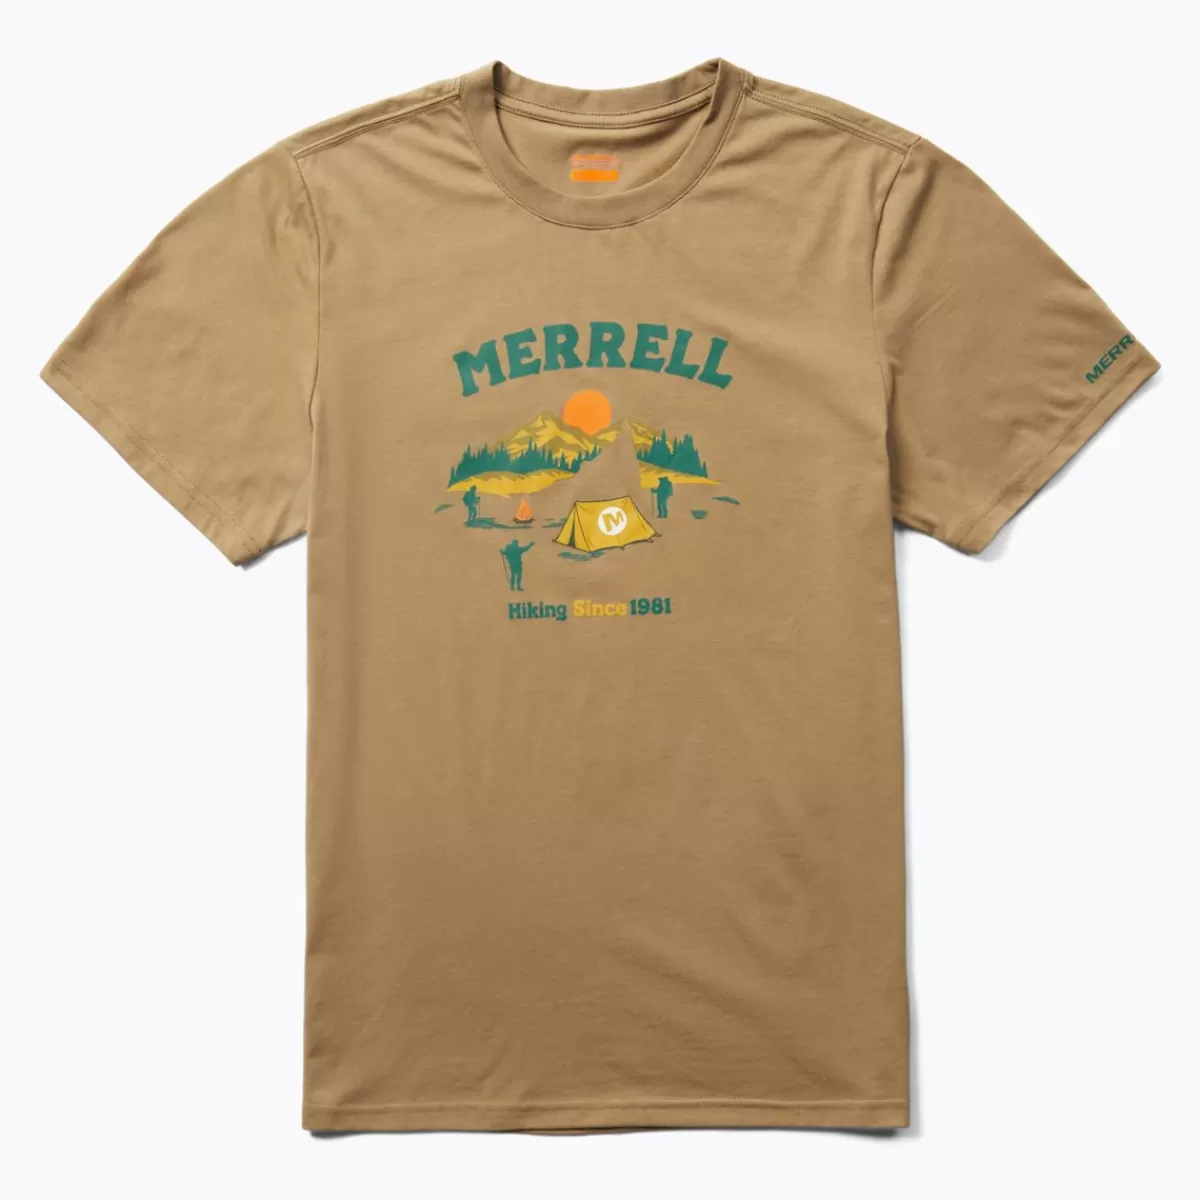 Merrell Men's Arched Camp Tee